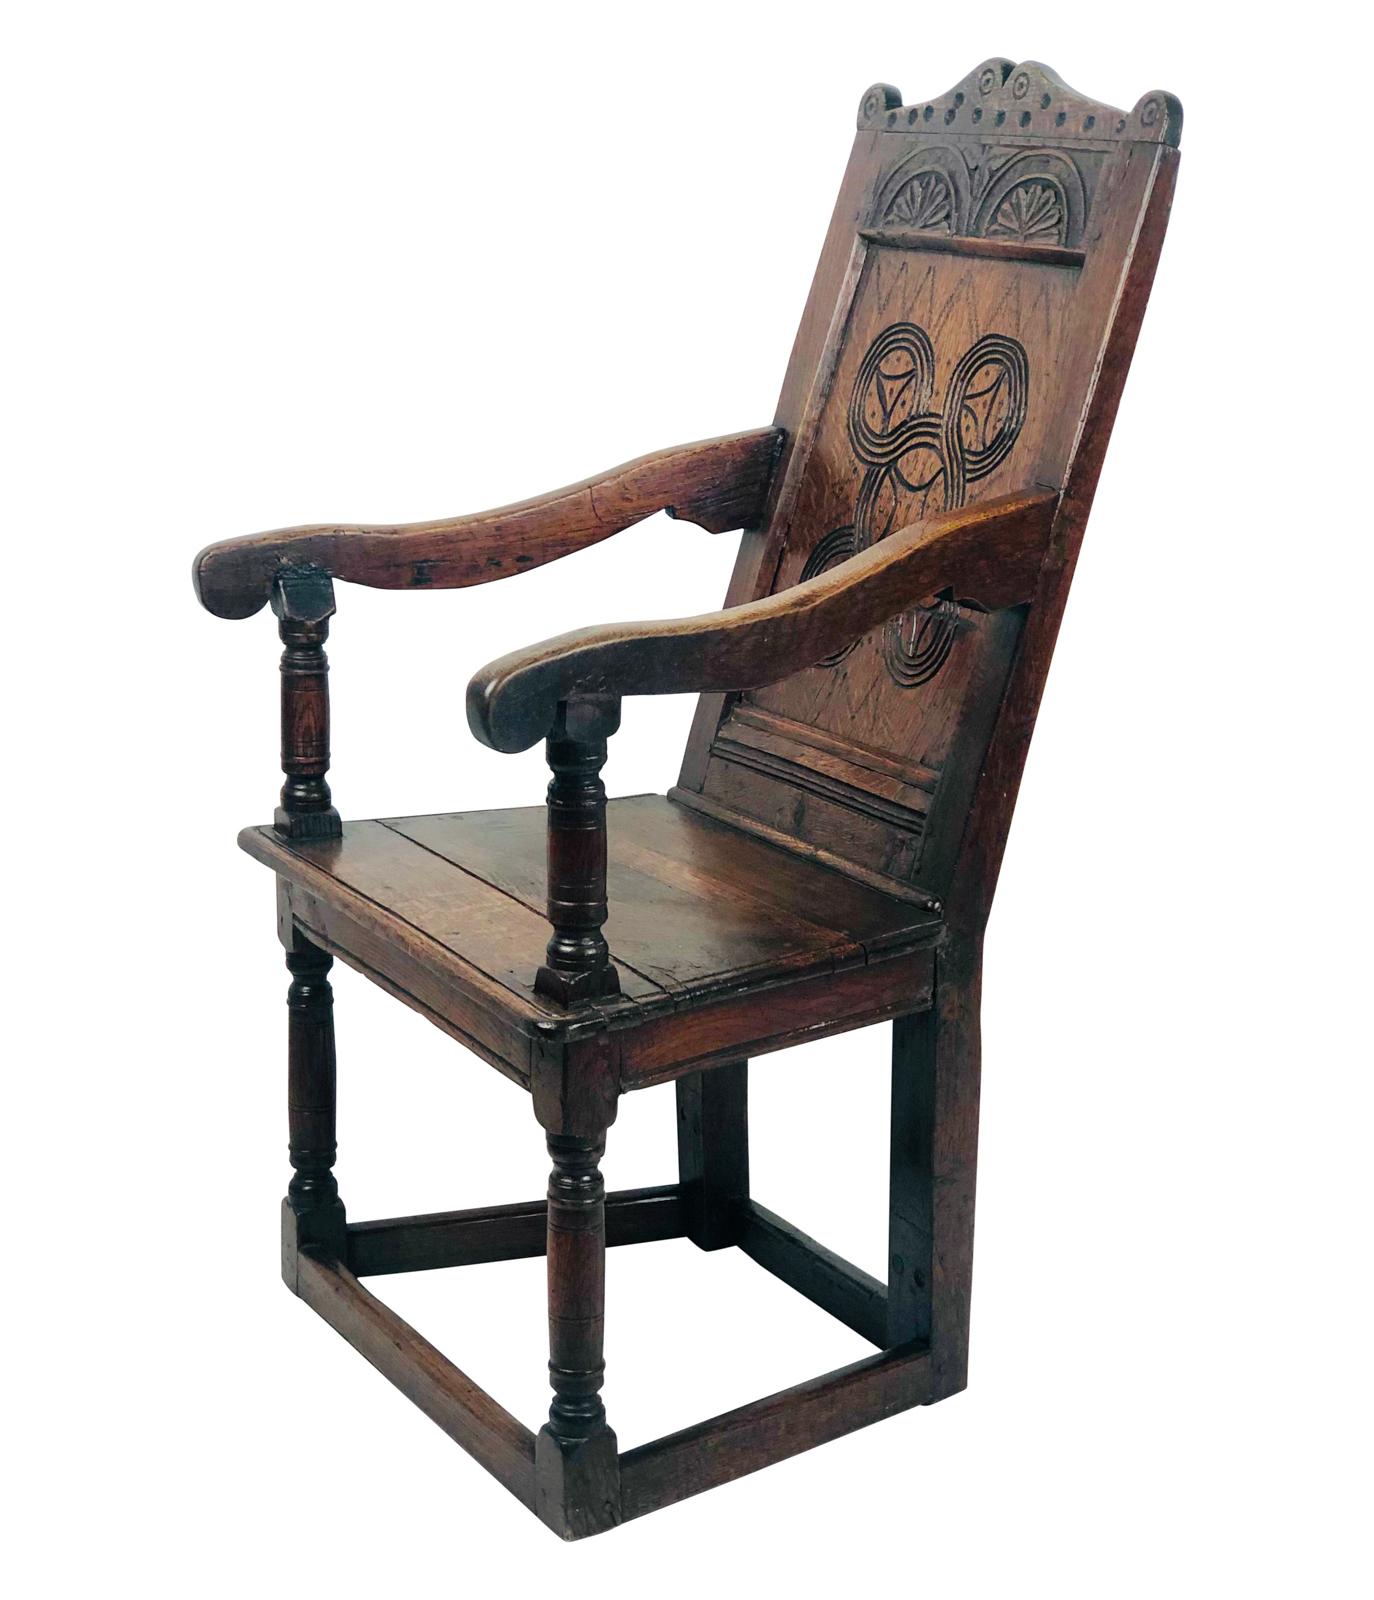 A late 17th century English Charles II oak carved armchair, circa 1680. These are rare and early examples of English furniture.

 